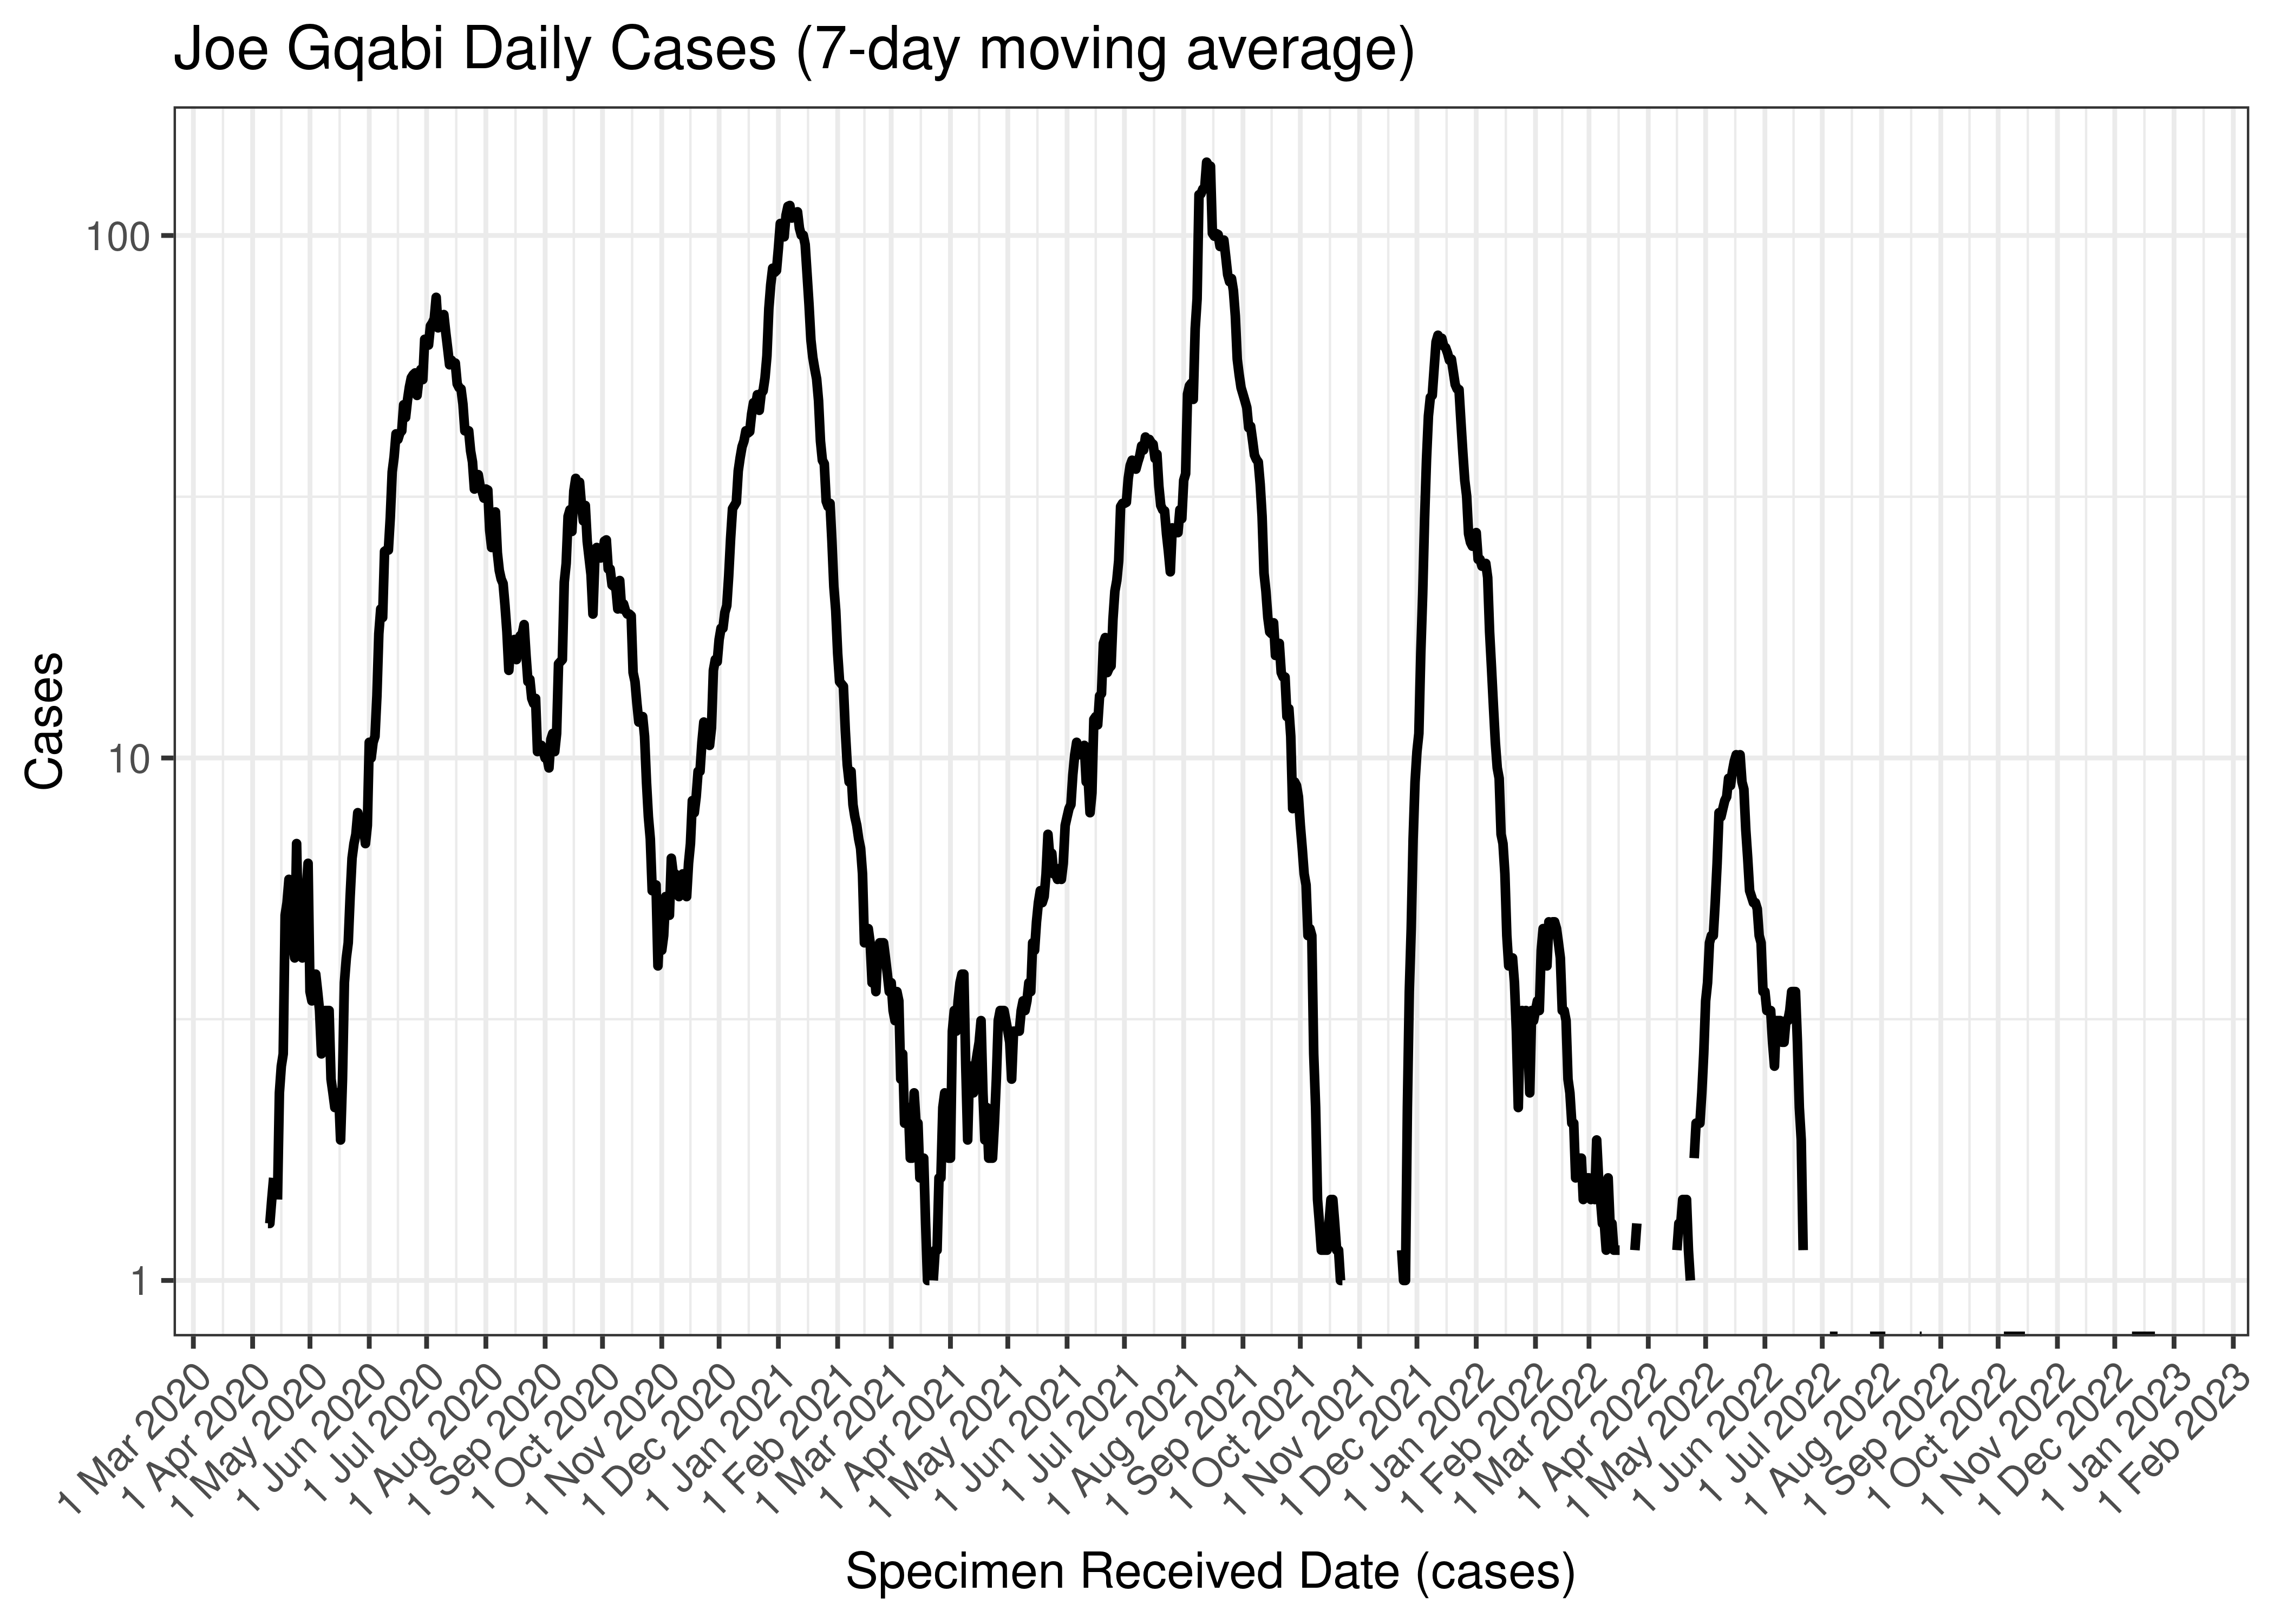 Joe Gqabi Daily Cases (7-day moving average)